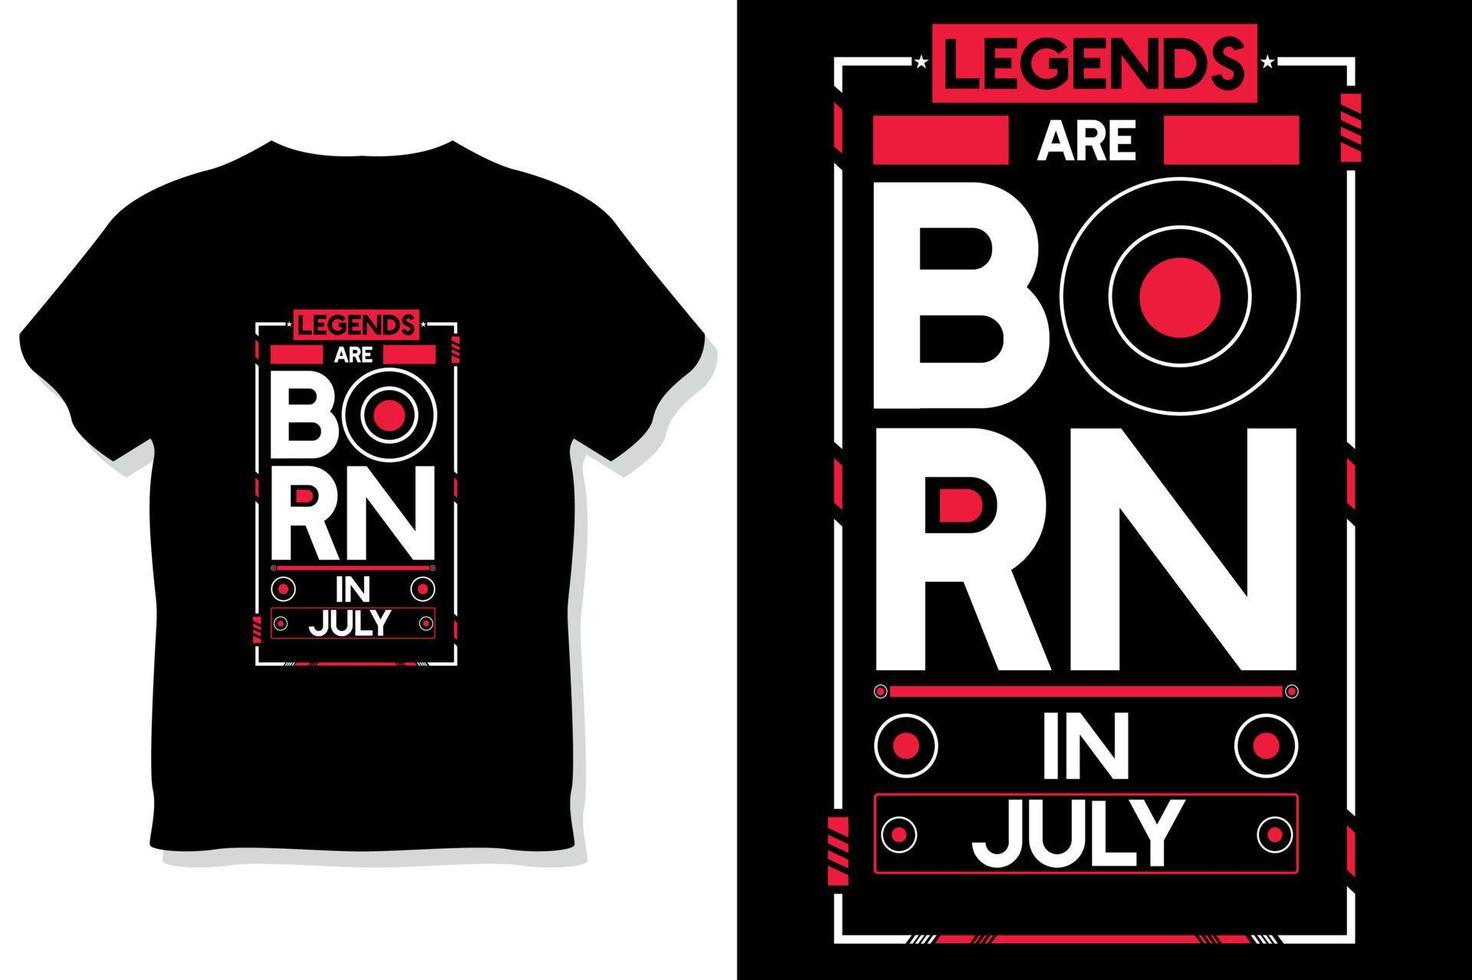 Legends are born in july birthday quotes t shirt design vector